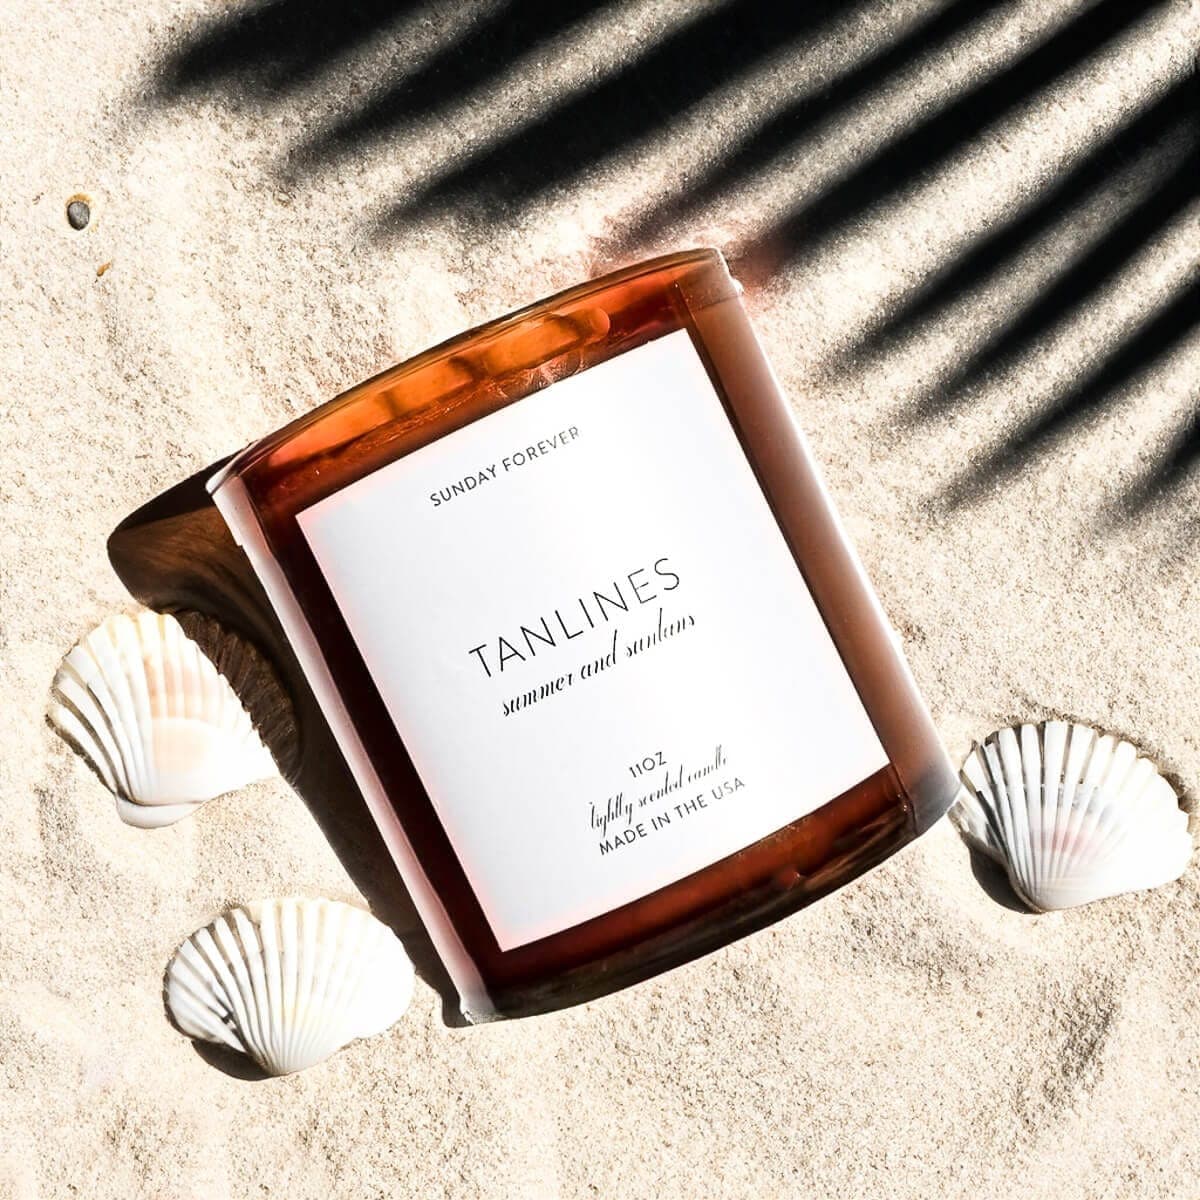 Sunday Forever Candles Tanlines Luxury Candle with Sandalwood